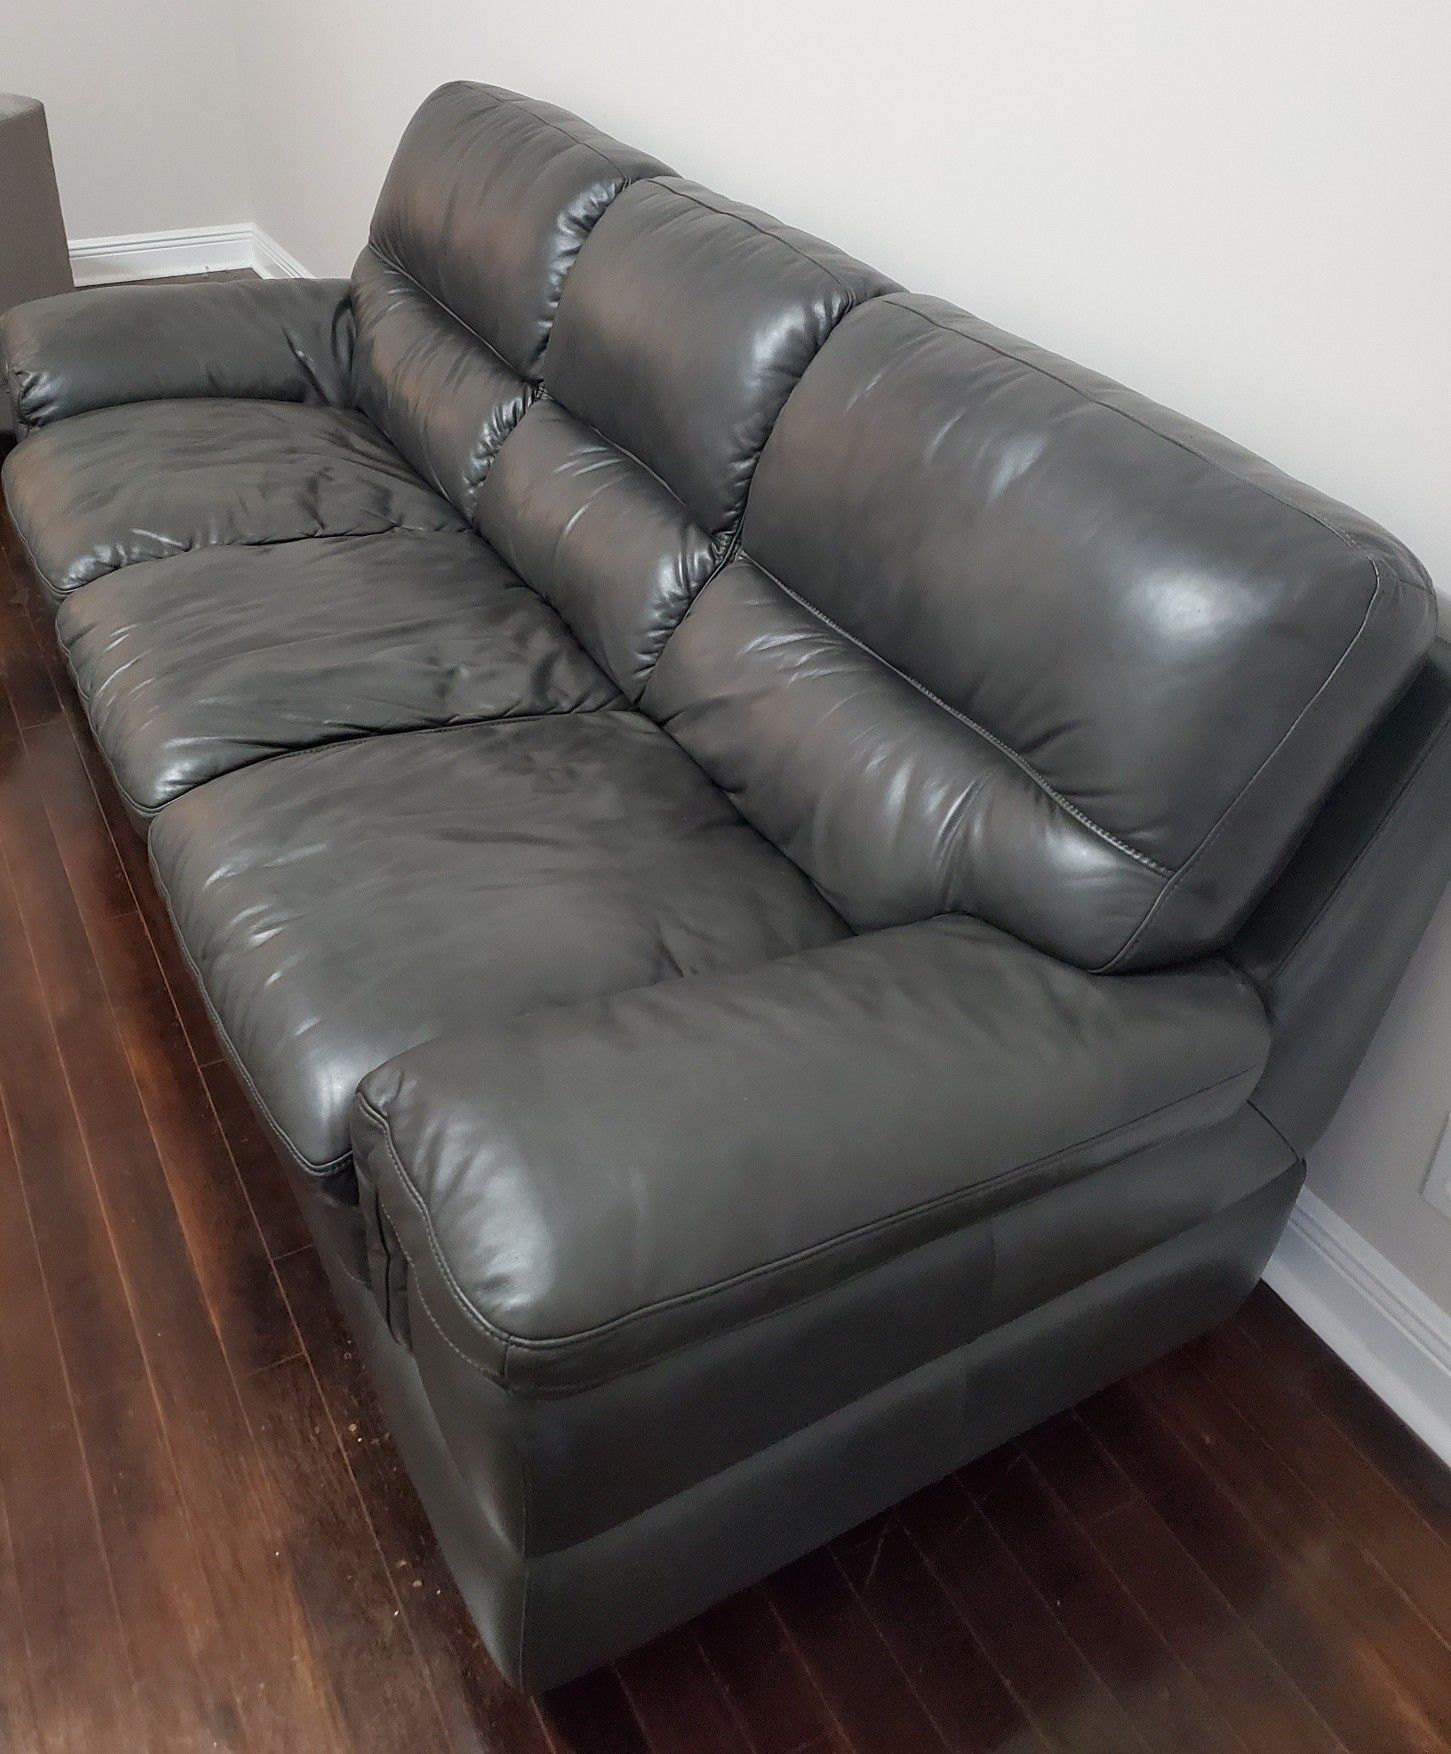 Gray soft leather couch.